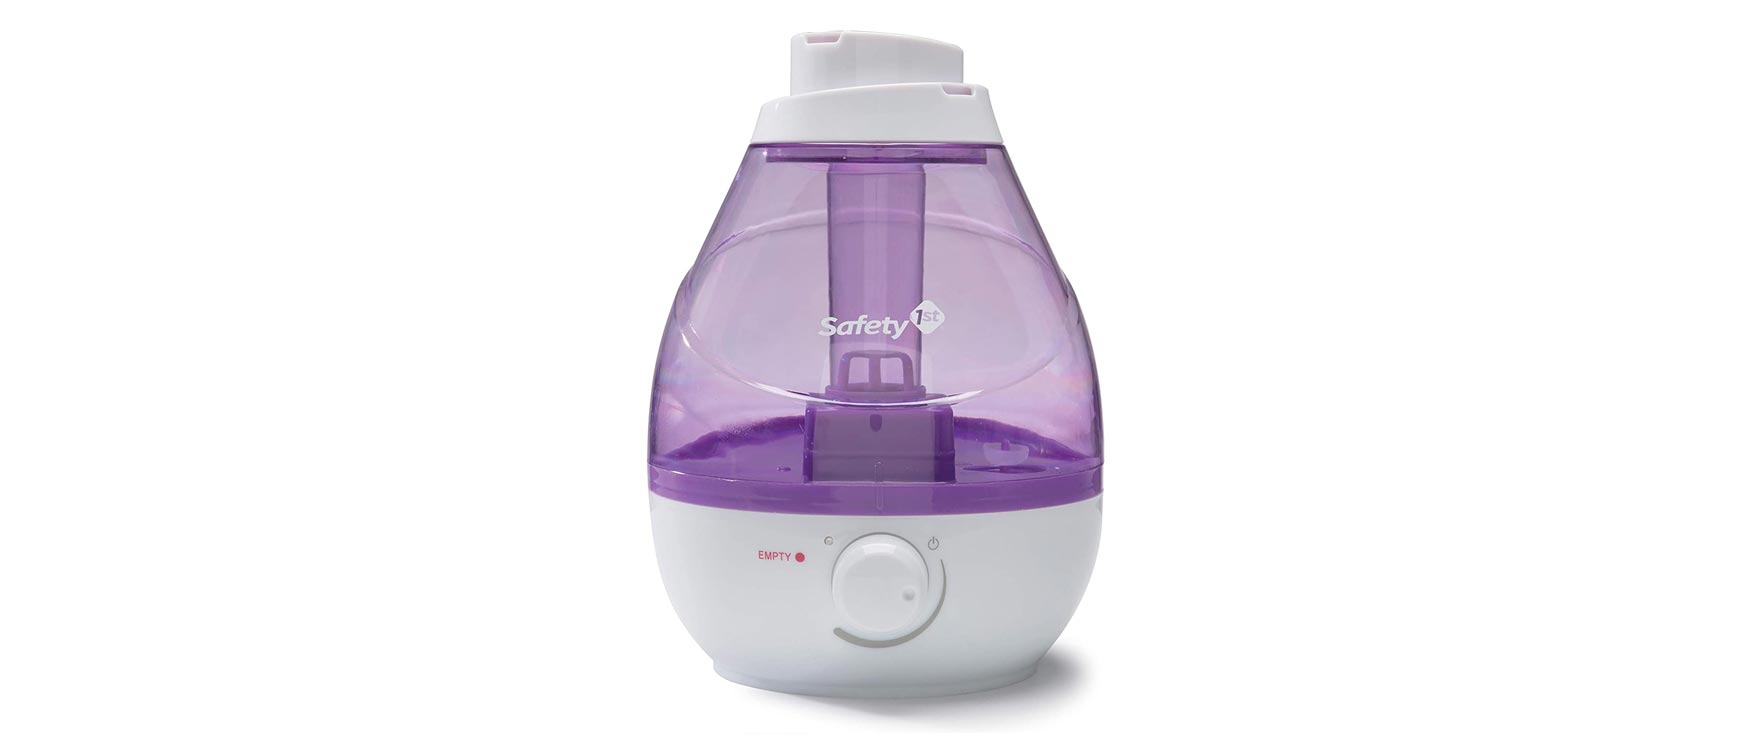 12. Safety 1st 360 Degree Cool Mist Ultrasonic Humidifier